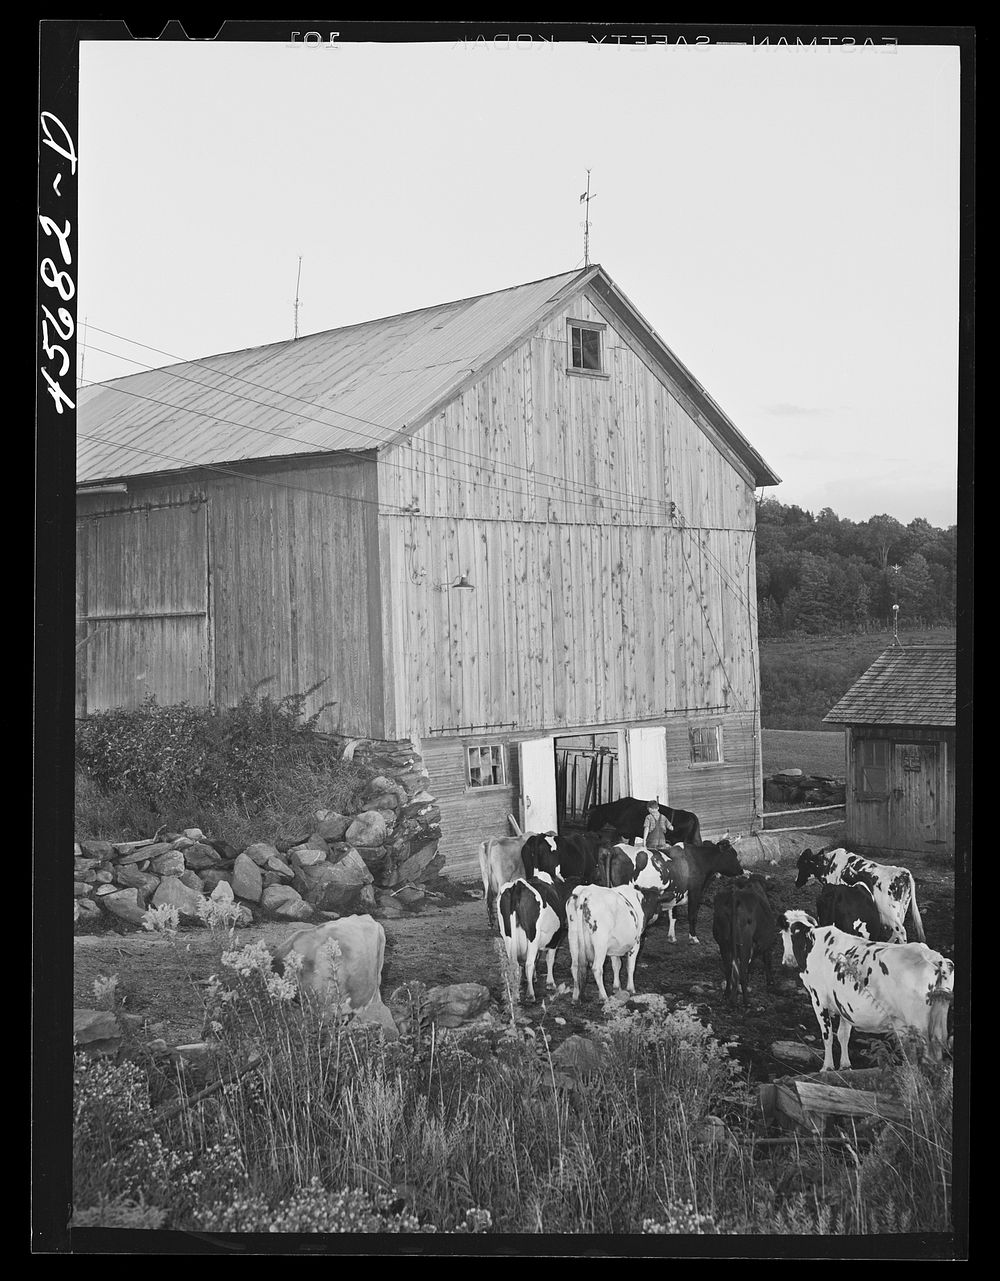 Getting the cows into the barn to be milked, on the farm of William Gaynor, FSA (Farm Security Administration) dairy farmer…